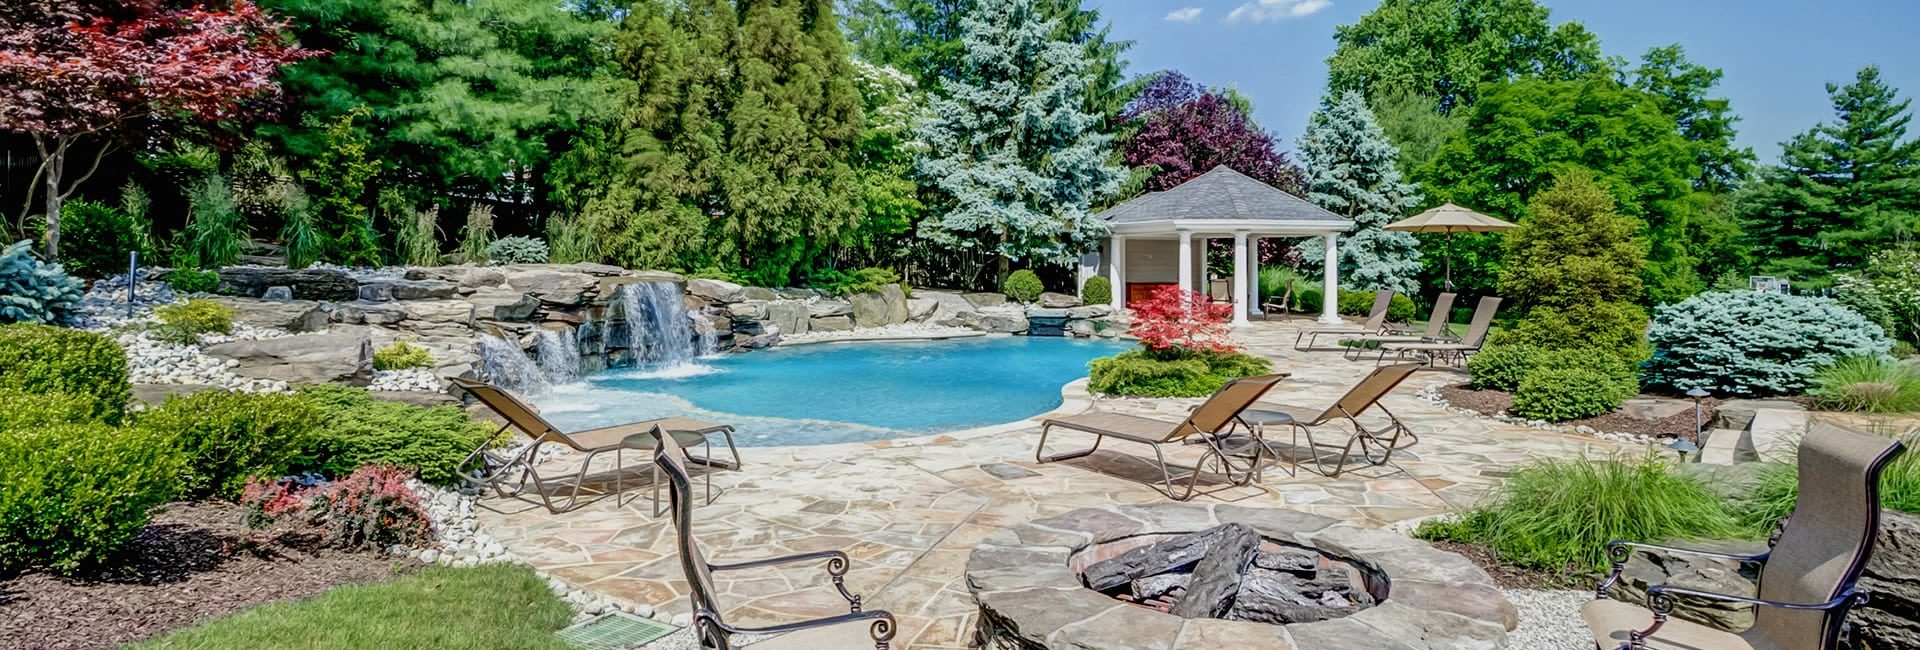 Outdoor Living Spaces with Pool, Cabana, Firepit ad Beautiful Trees